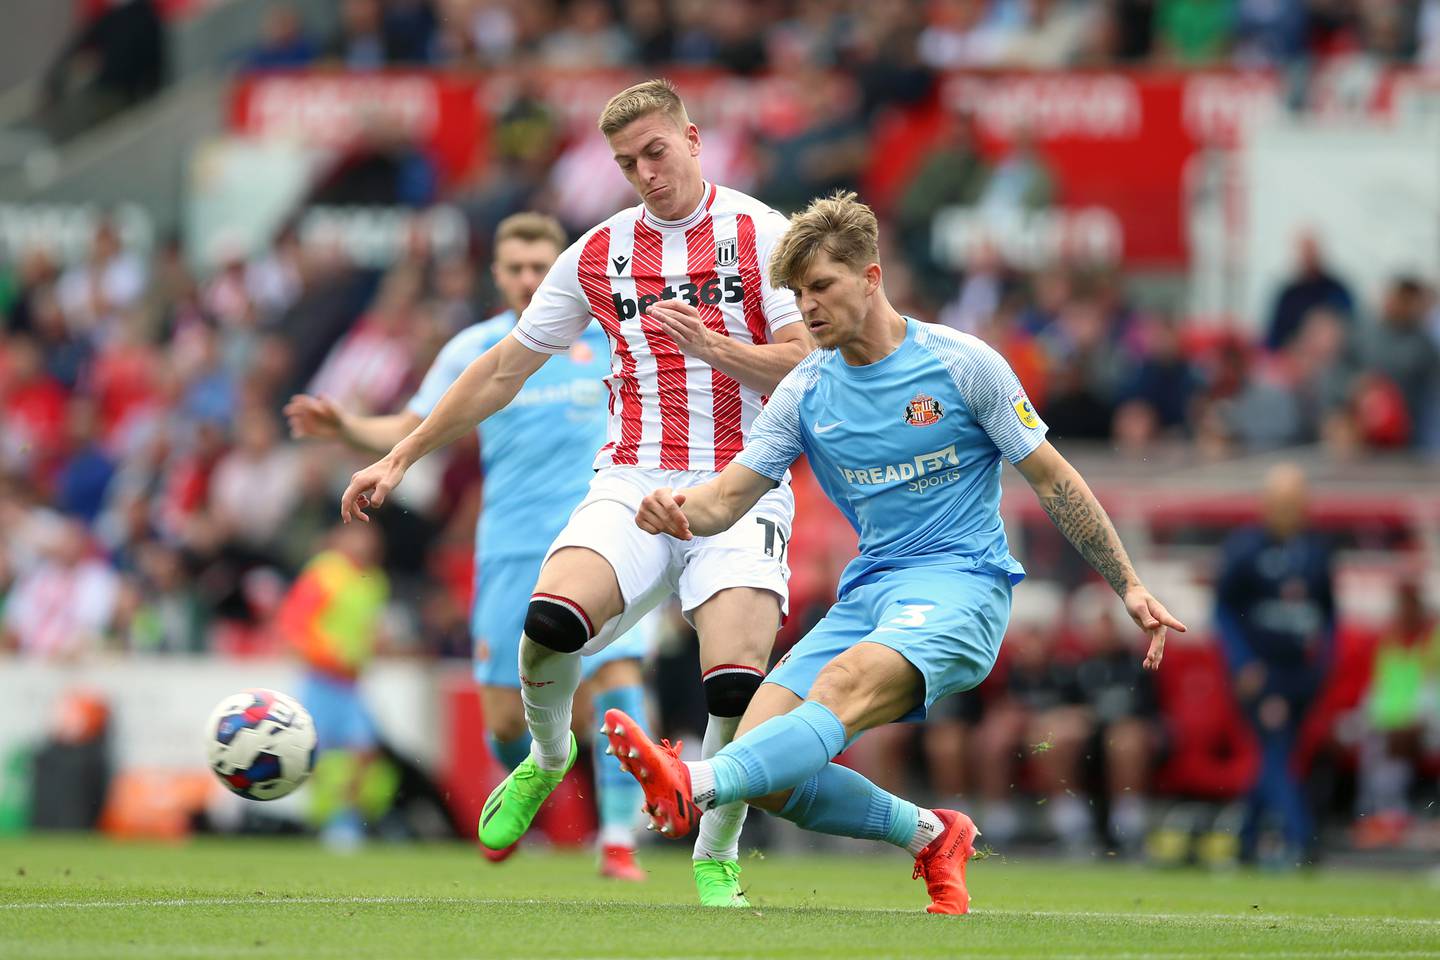 Stoke City's Liam Delap and Sunderland's Dennis Cirkin battle for the ball in the Sky Bet Championship match at the bet365 Stadium, Stoke. on August 20, 2022. PA